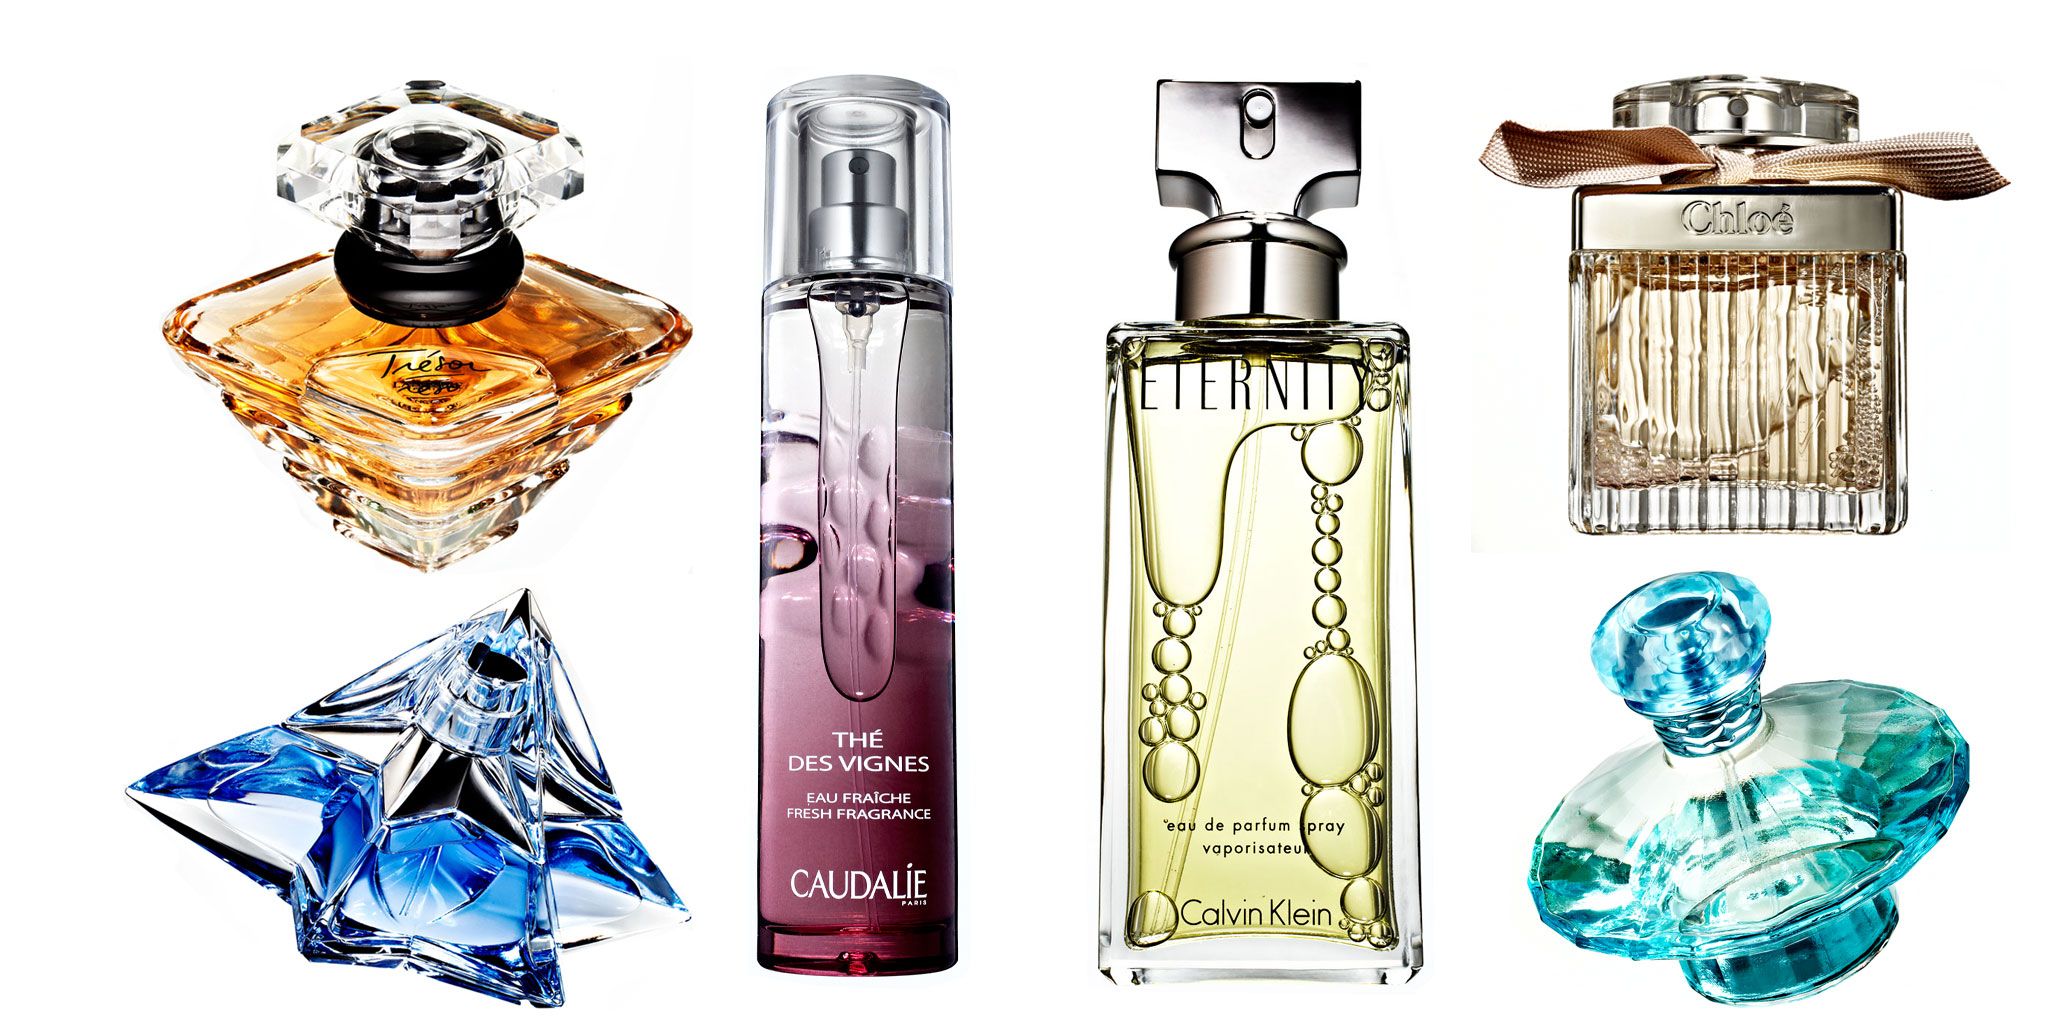 Women Perfumes With The Greatest Seducing Power Of All Time - Top 10